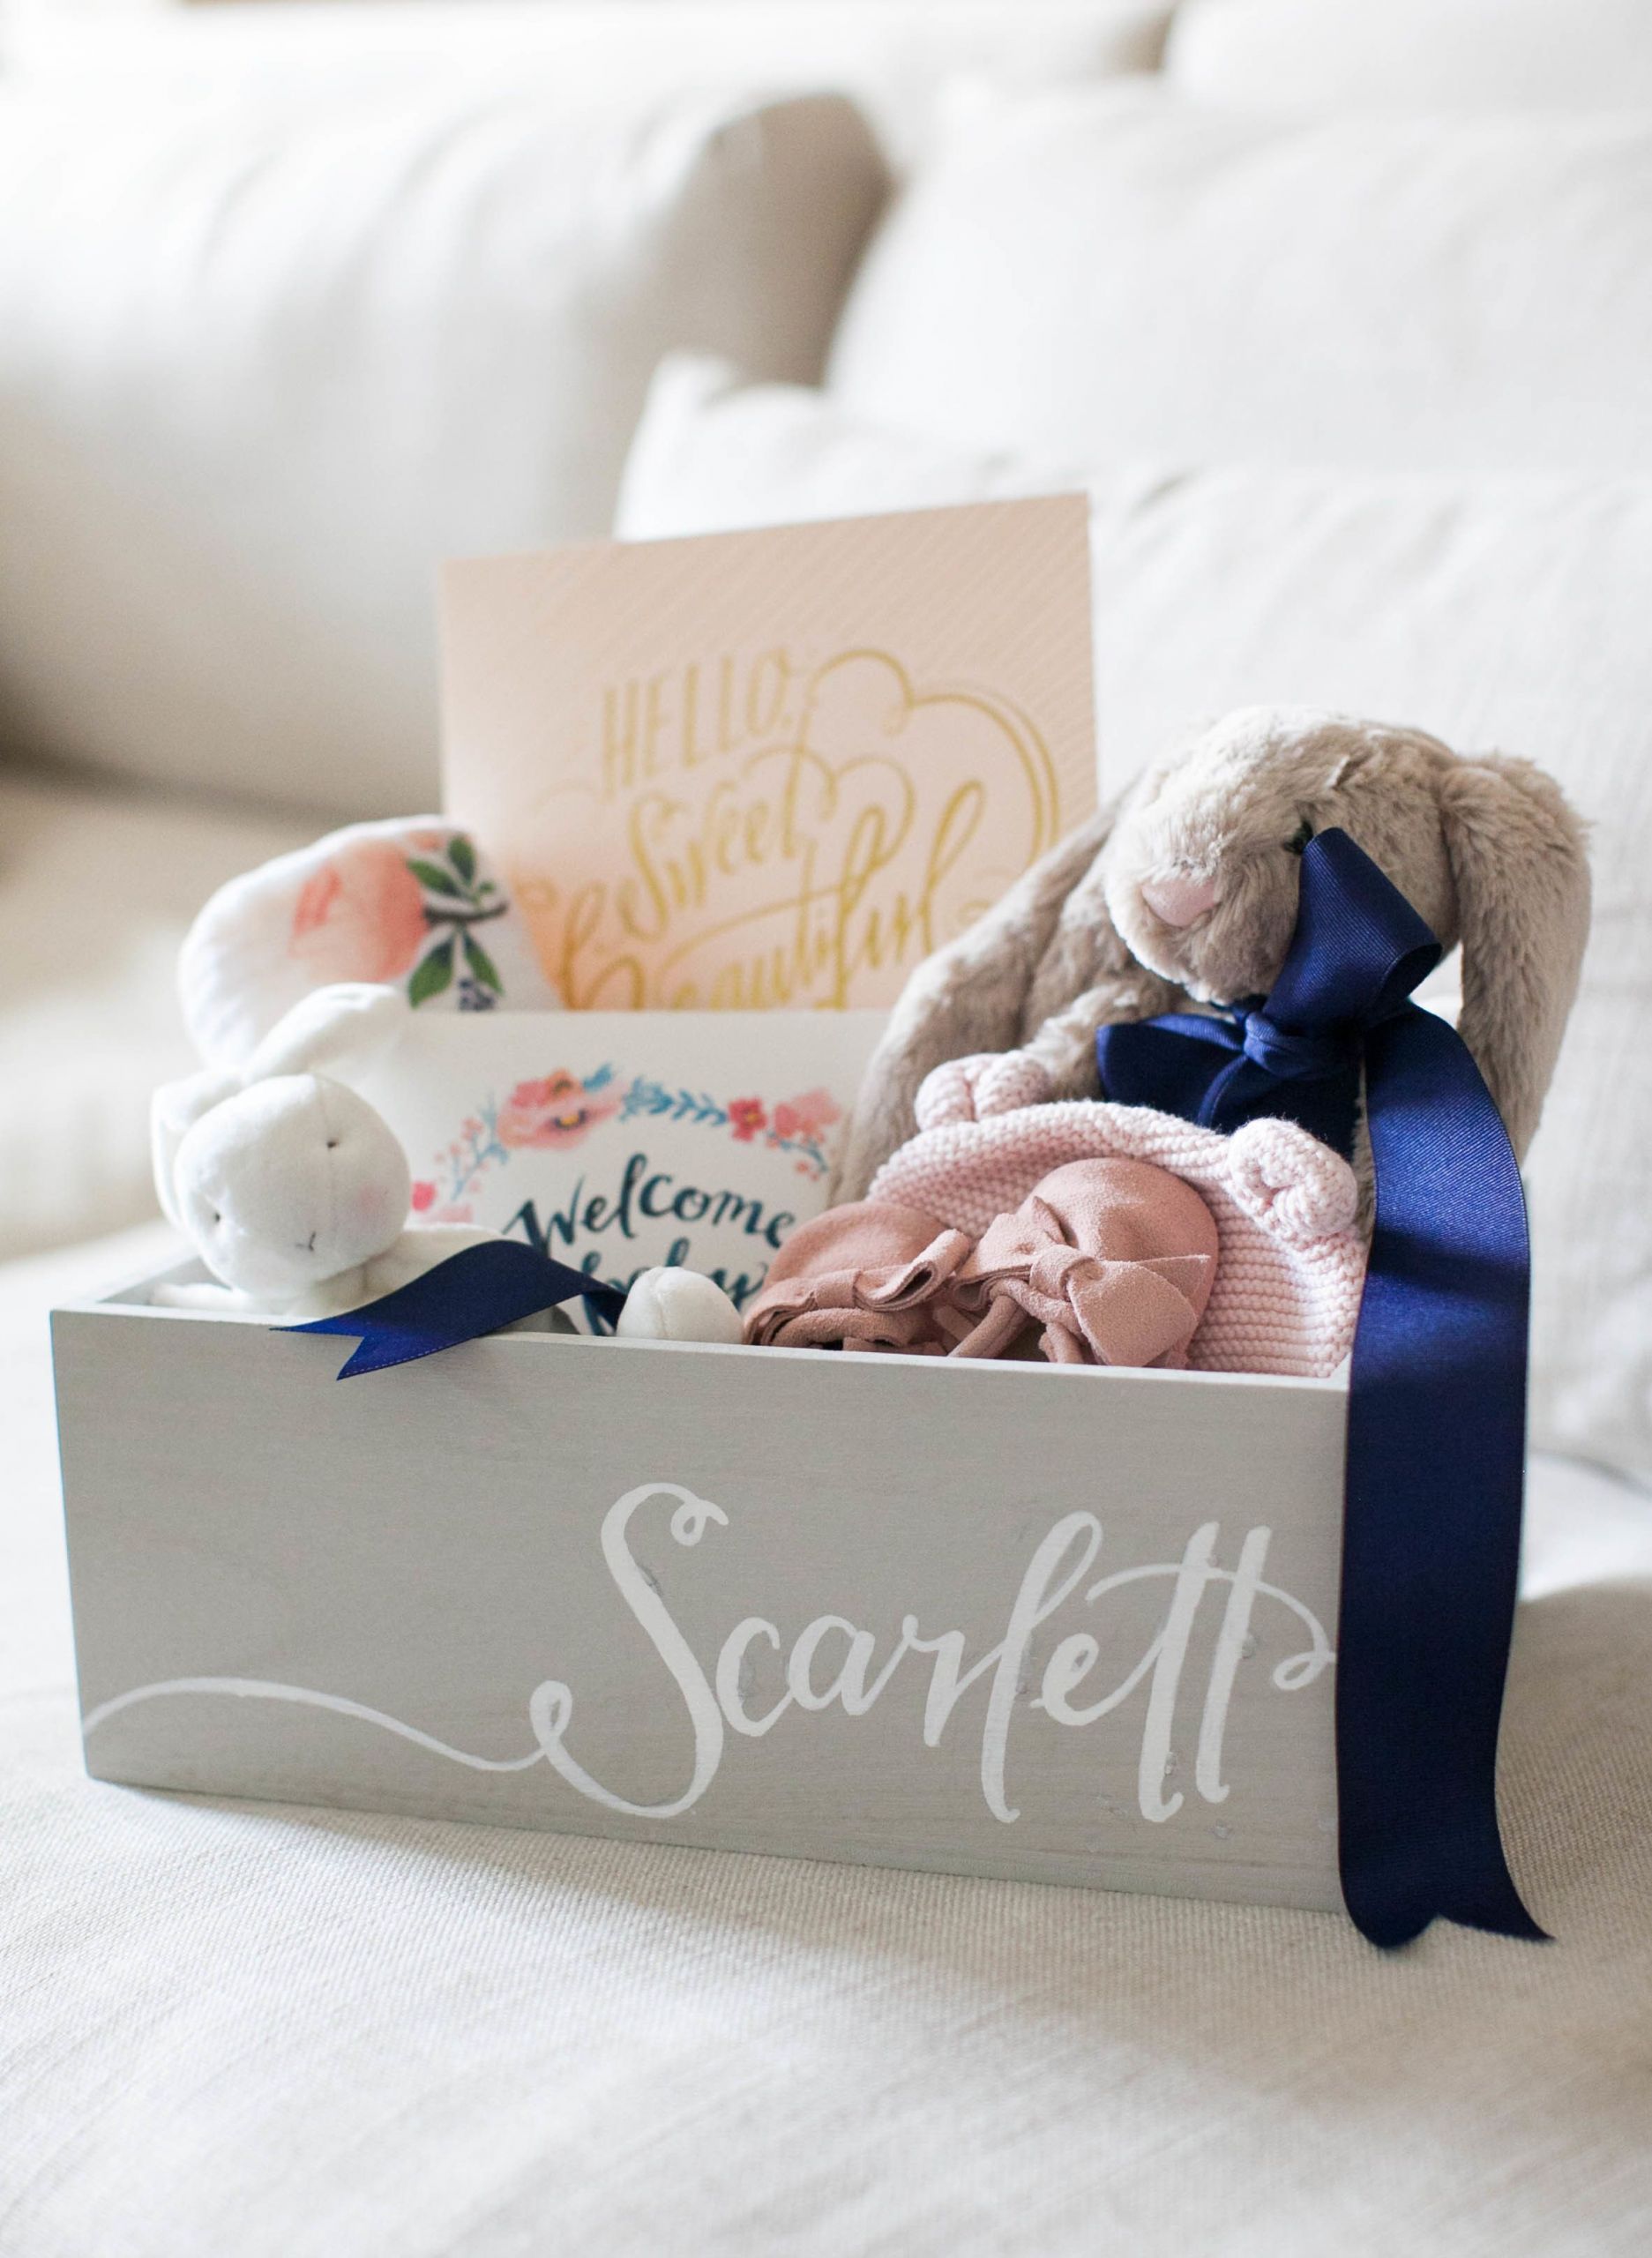 New Baby Gift Ideas For Parents
 19 f the Registry Baby Shower Gifts the Parents to be